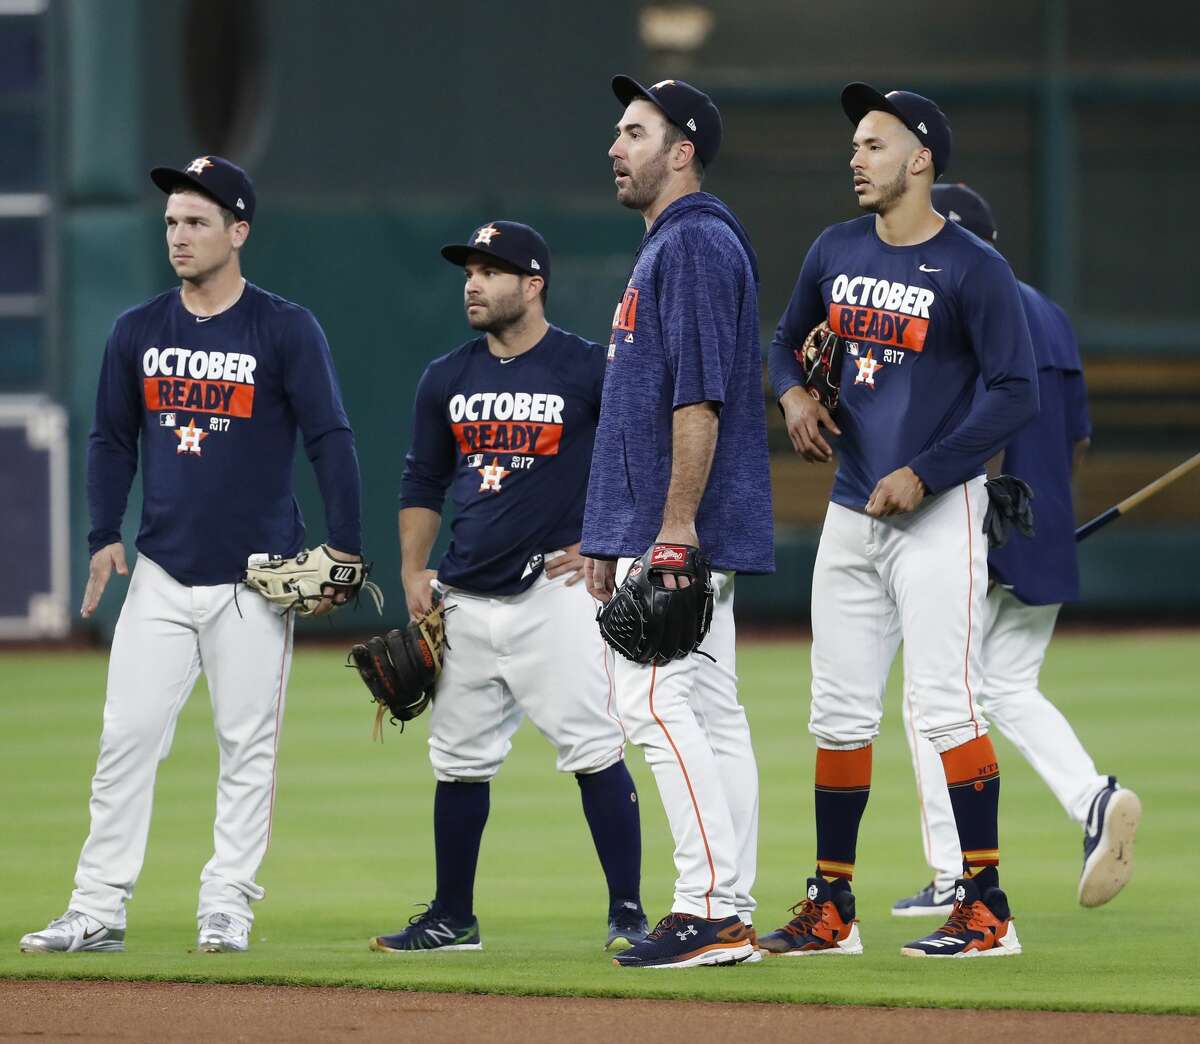 Houston Astros pitcher Justin Verlander chats with Carlos Correa, Jose Altuve, and Alex Bregman during batting practice at Minute Maid Park, Wednesday, Oct. 4, 2017, in Houston, as they prepare to take on the Boston Red Sox in the ALDS playoffs. ( Karen Warren / Houston Chronicle )